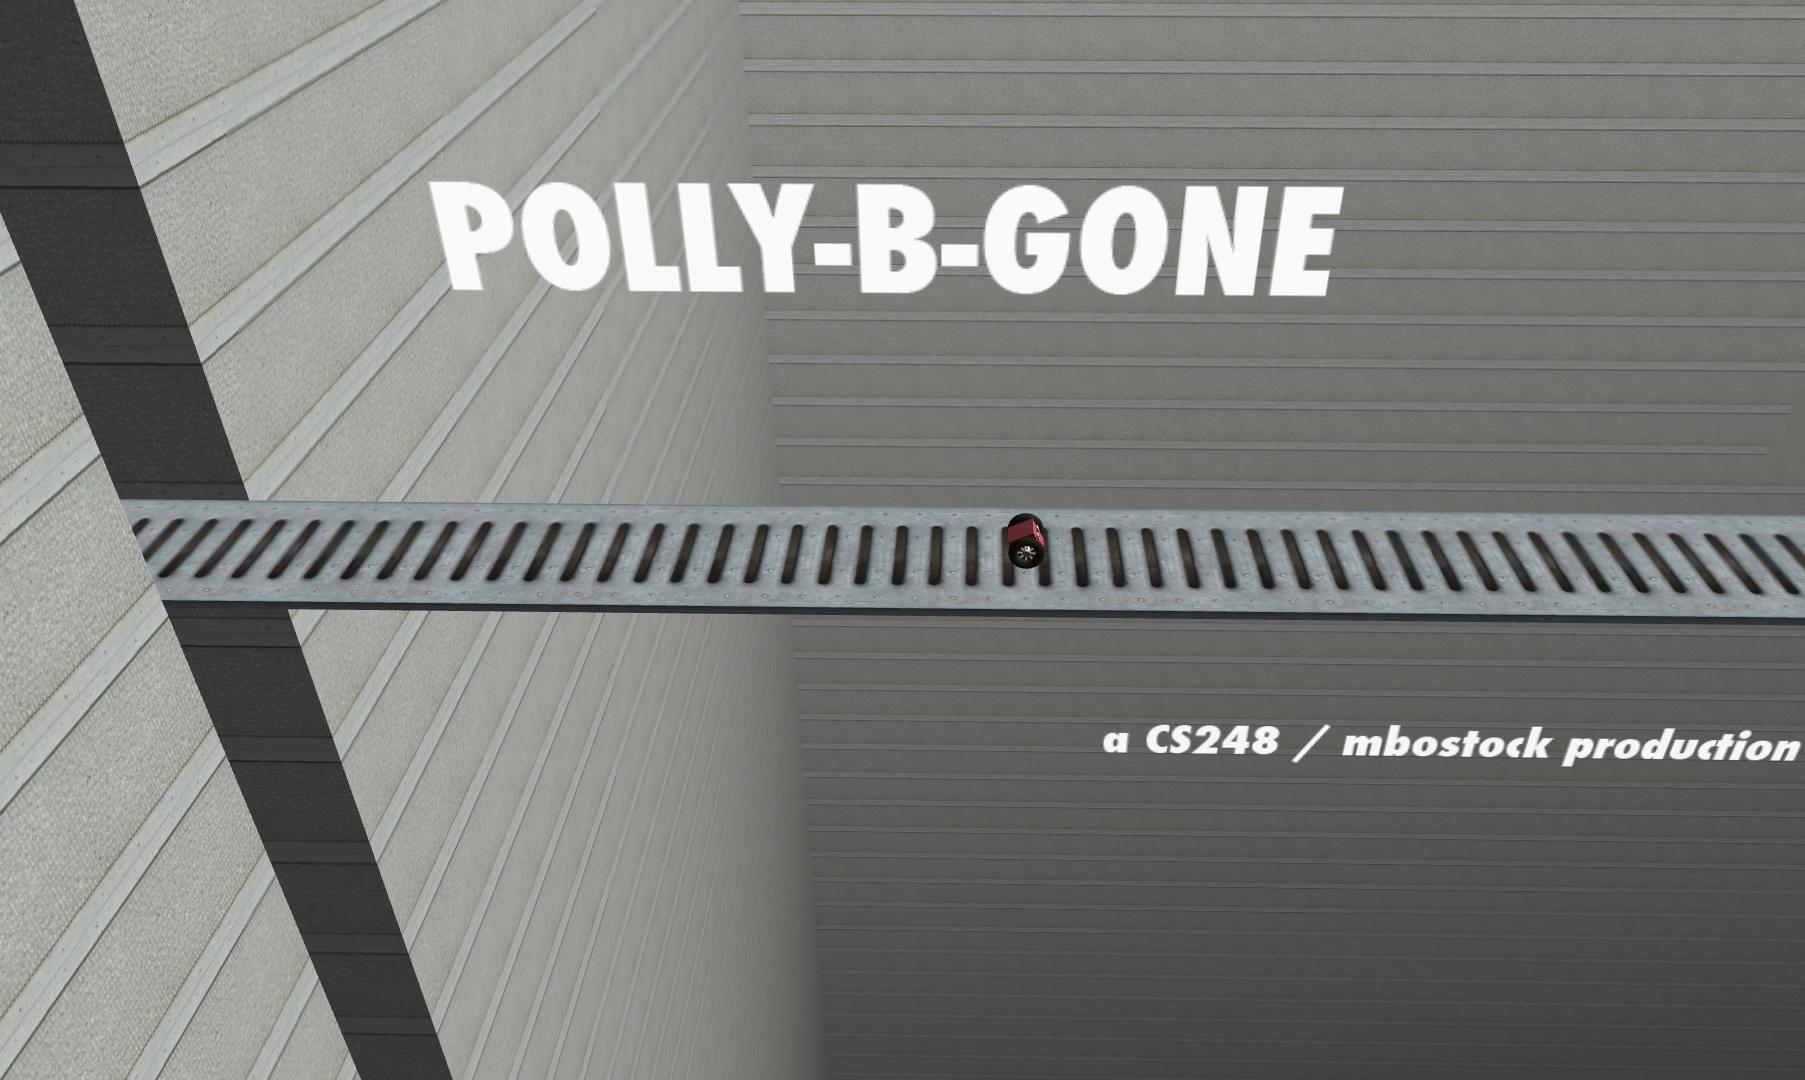 Polly-B-Gone 1.0 : Introduction